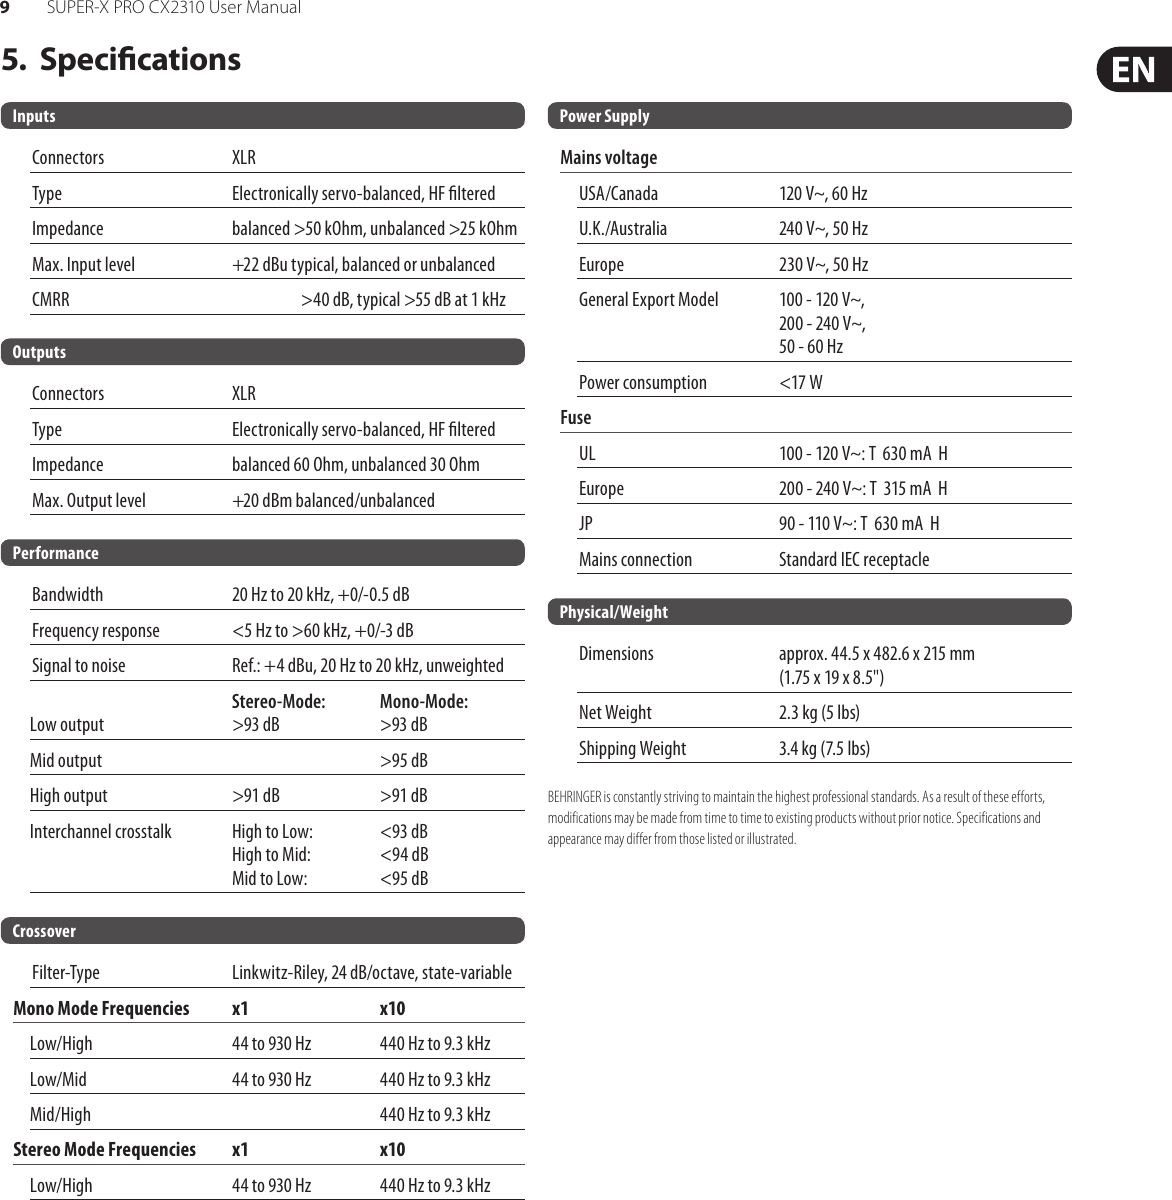 Page 9 of 10 - Behringer Behringer-Super-X-Pro-Cx2310-Users-Manual- SUPER-X PRO CX2310  Behringer-super-x-pro-cx2310-users-manual